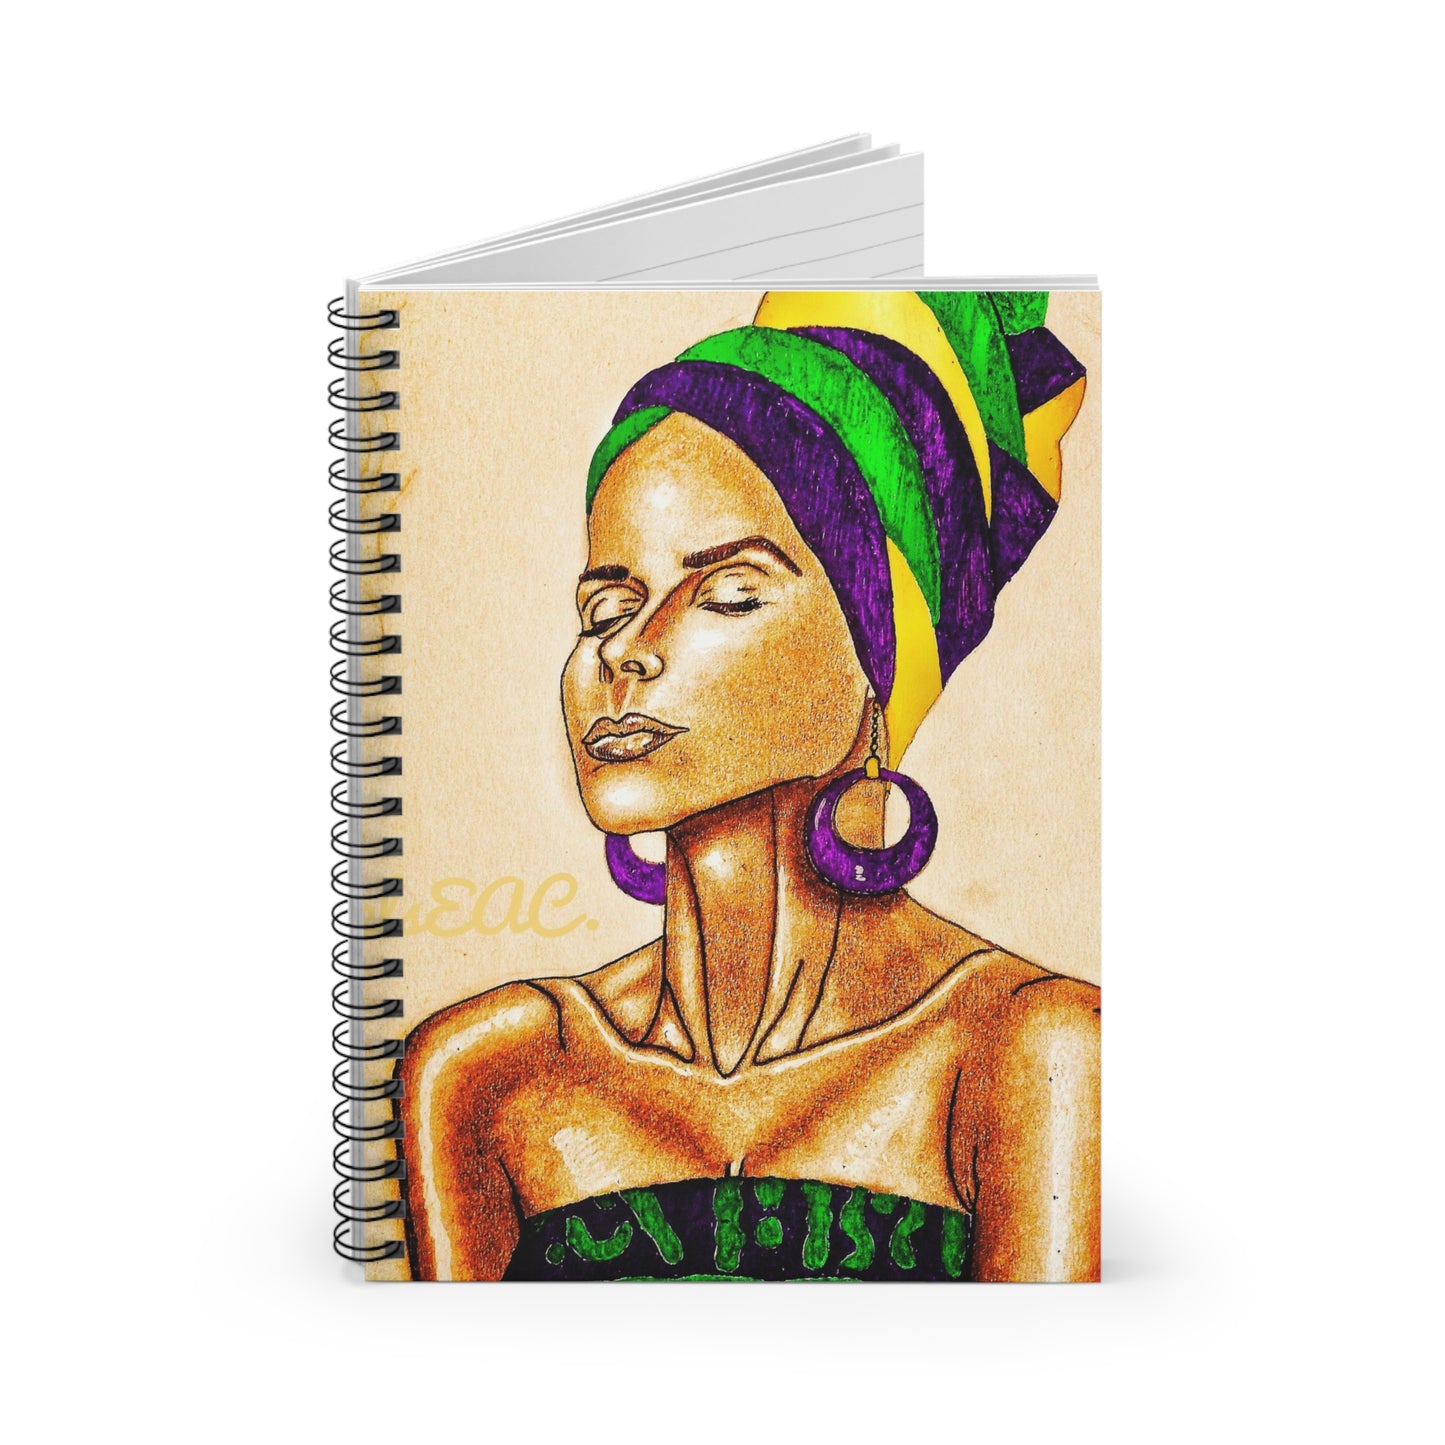 Stylish Drover Yellow Spiral Notebook - Ruled Line